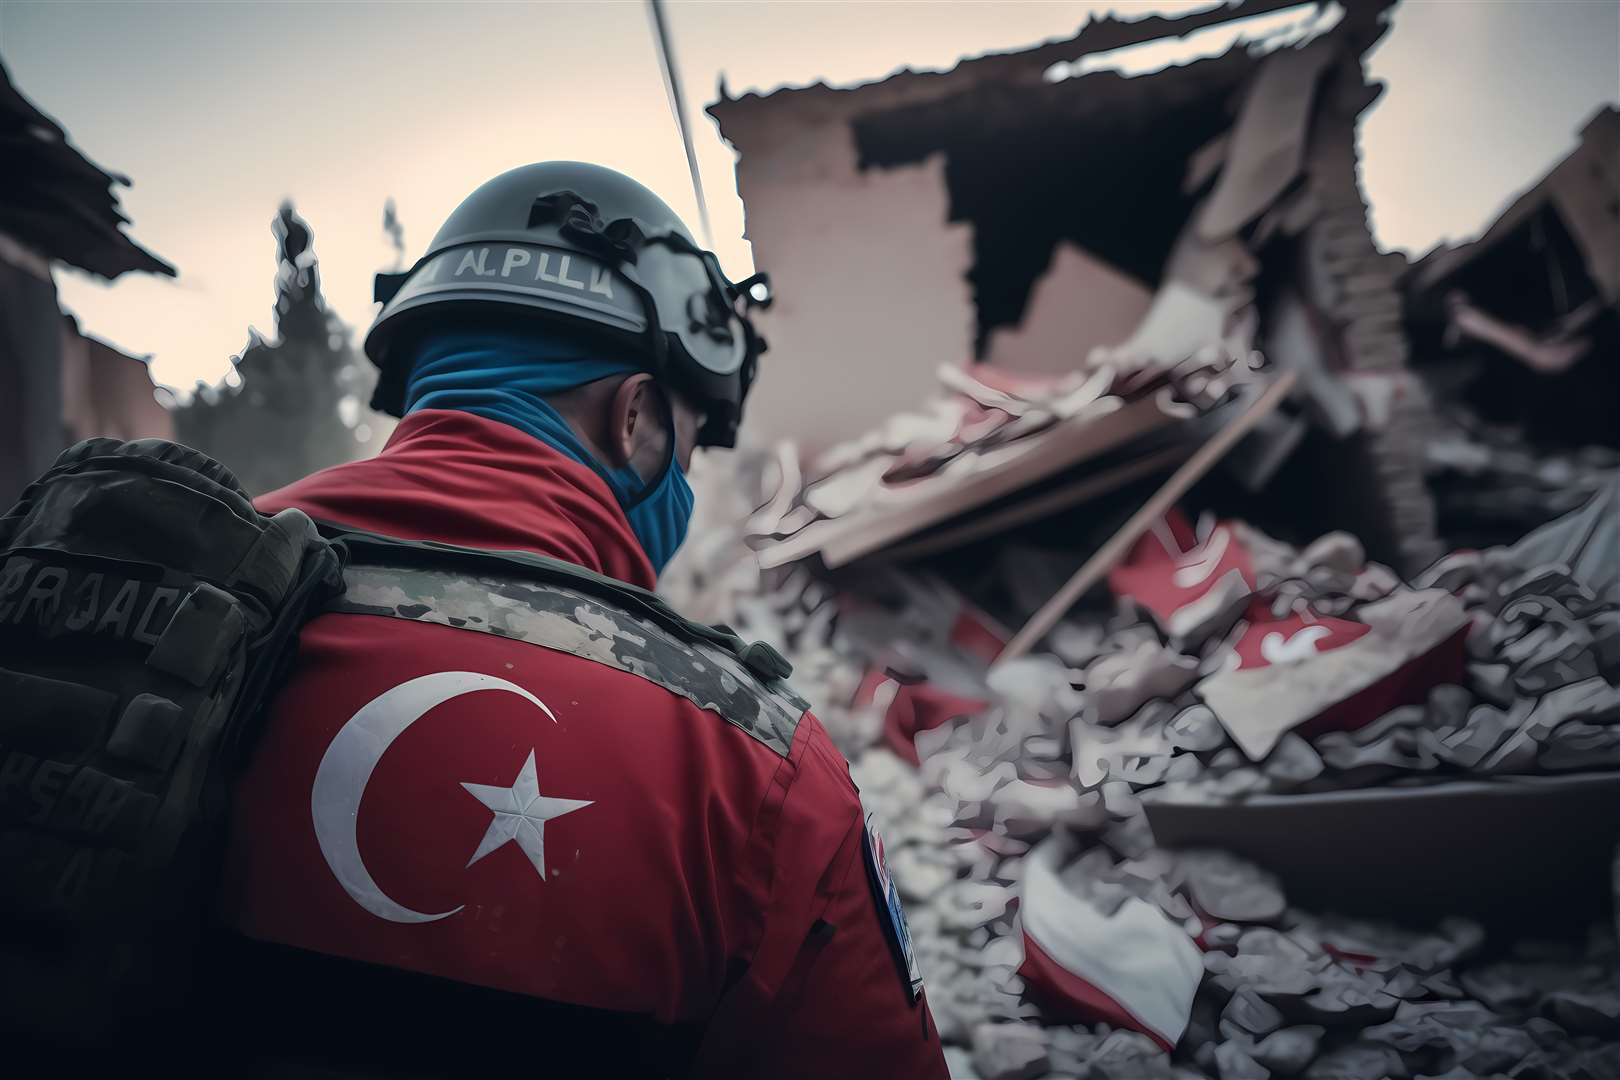 More than 40,000 people are known to have died as a result of the earthquakes in Turkey and Syria.